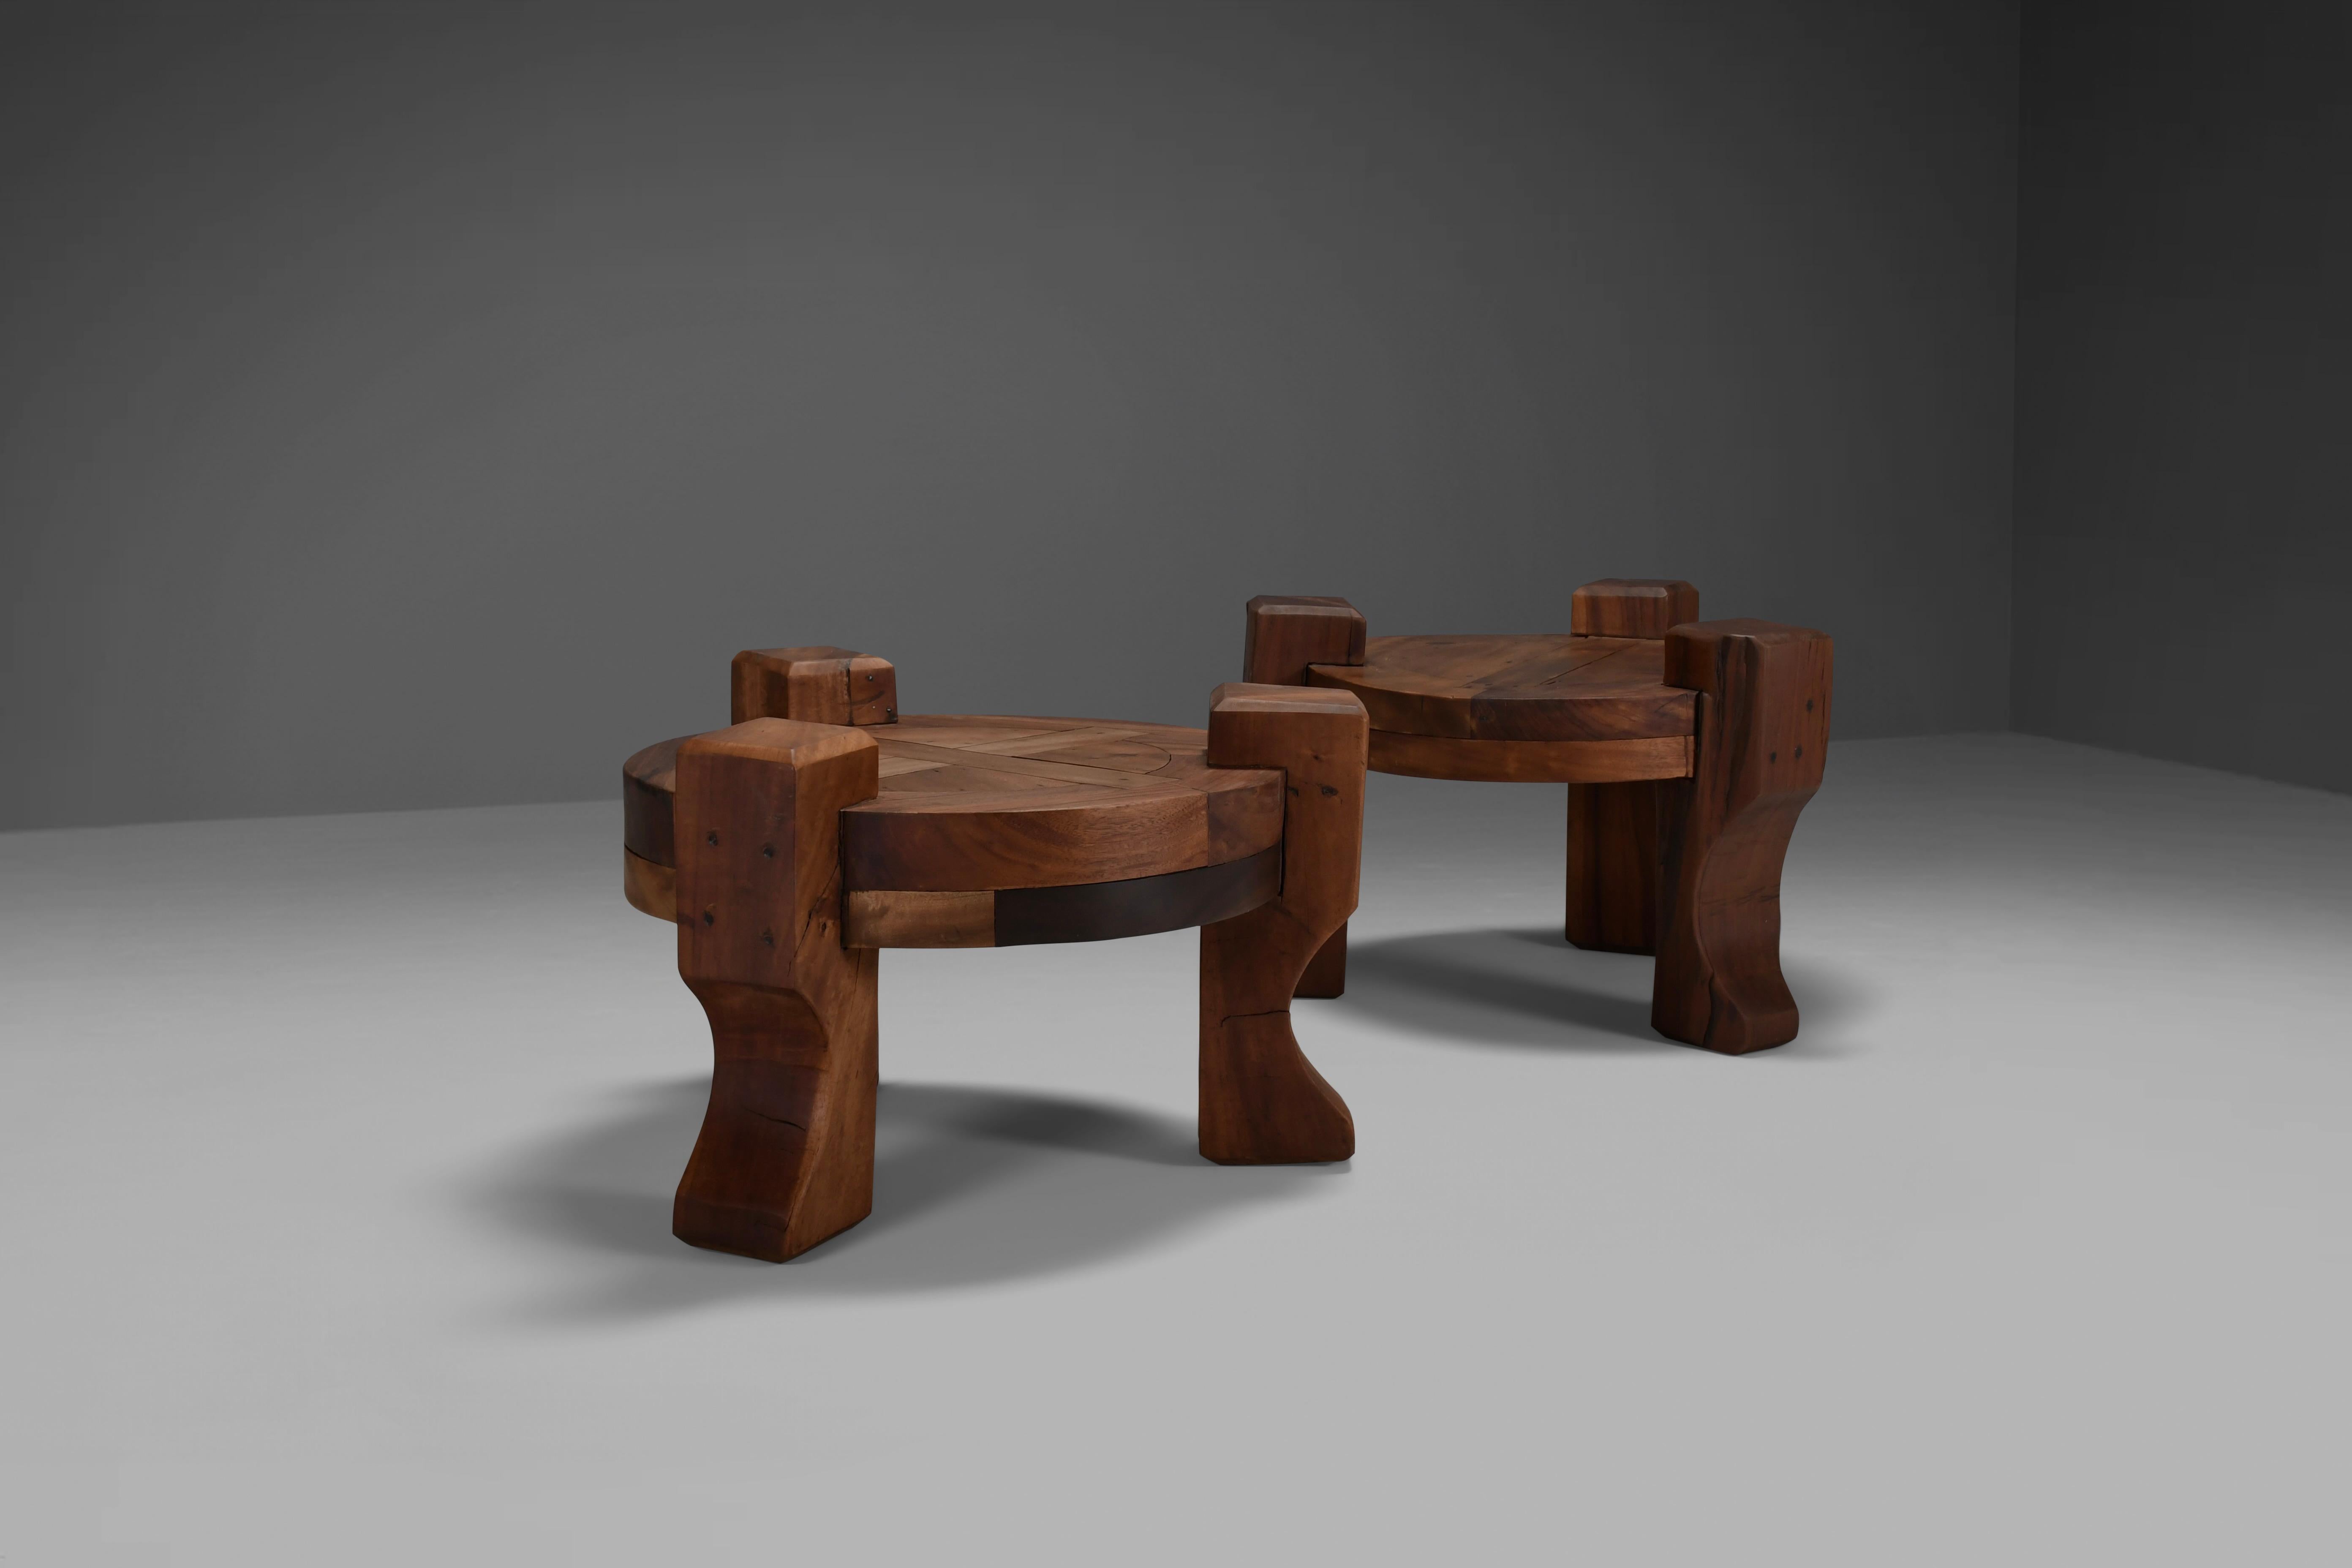 Set of beautiful rustic end tables in very good condition.

These tables were produced in Brazil in the 1960s.

They are made of solid tropical wood and are extremely heavy.

These tables are a celebration of simplicity and unpretentious design. The